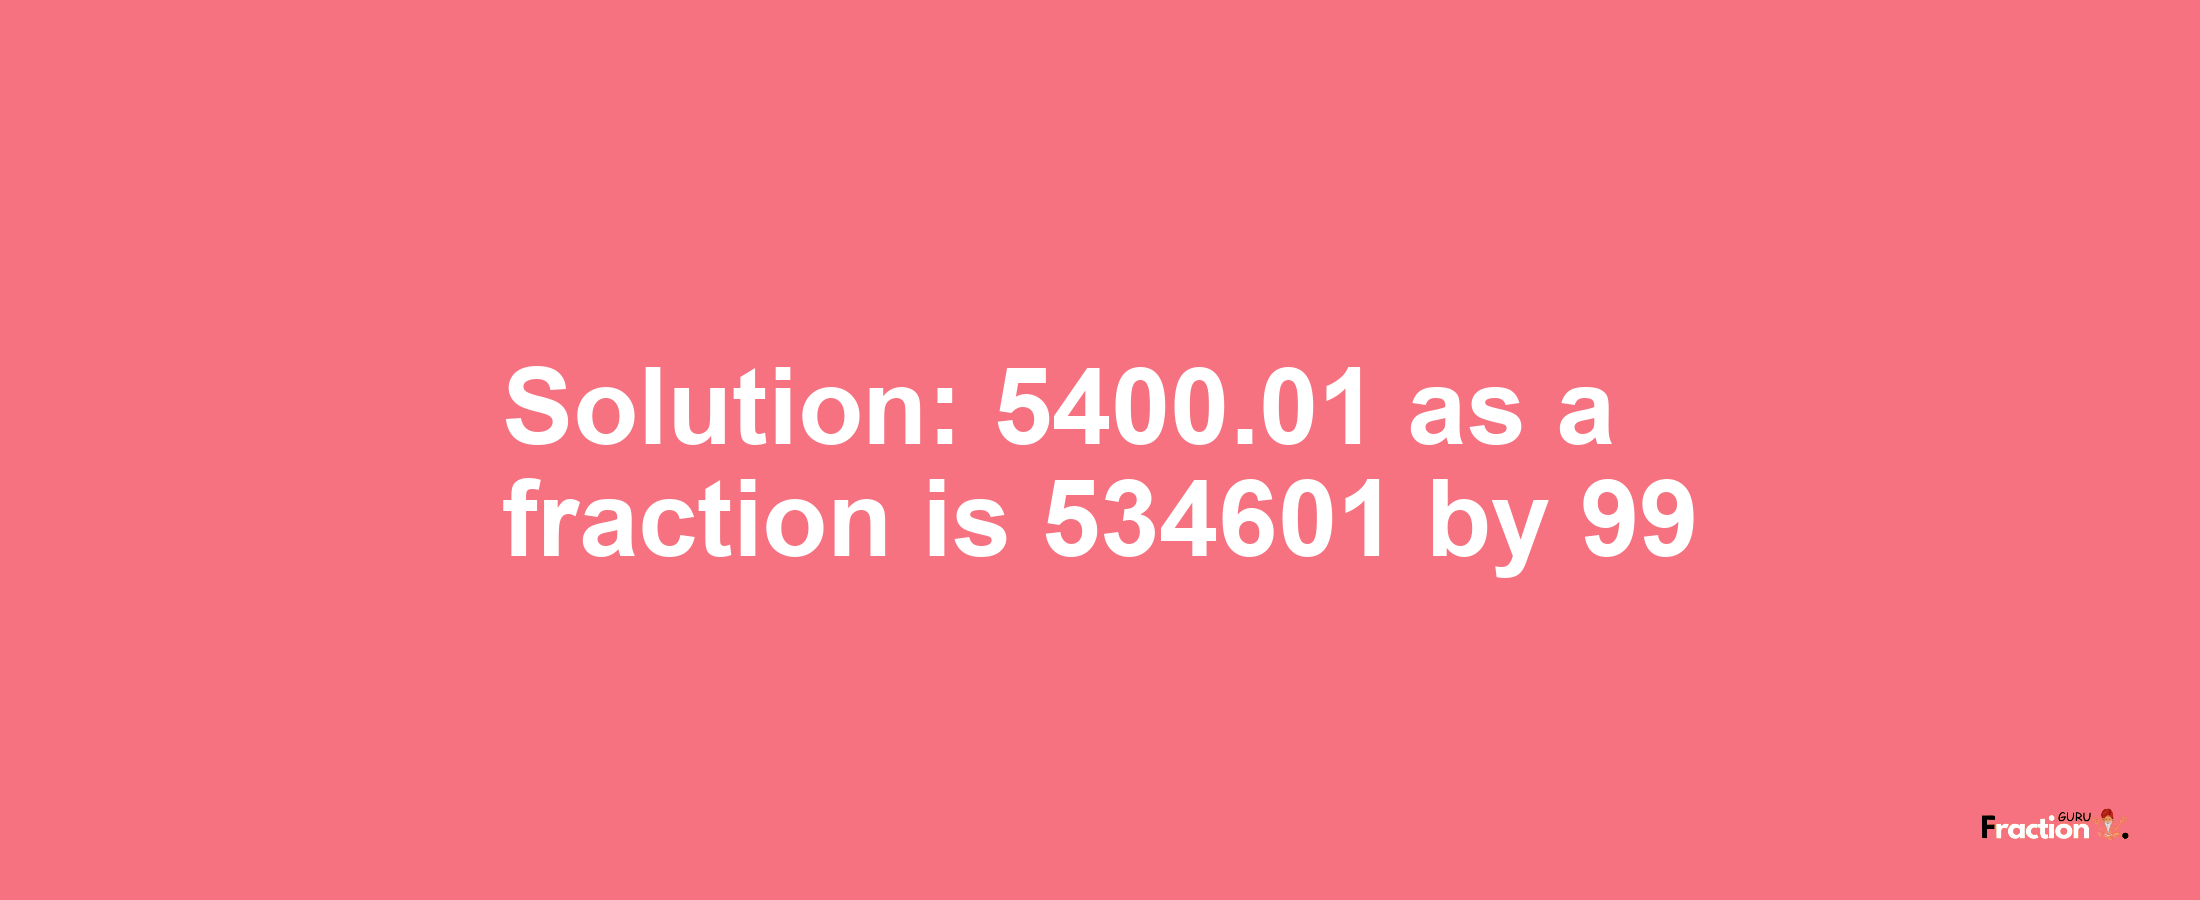 Solution:5400.01 as a fraction is 534601/99